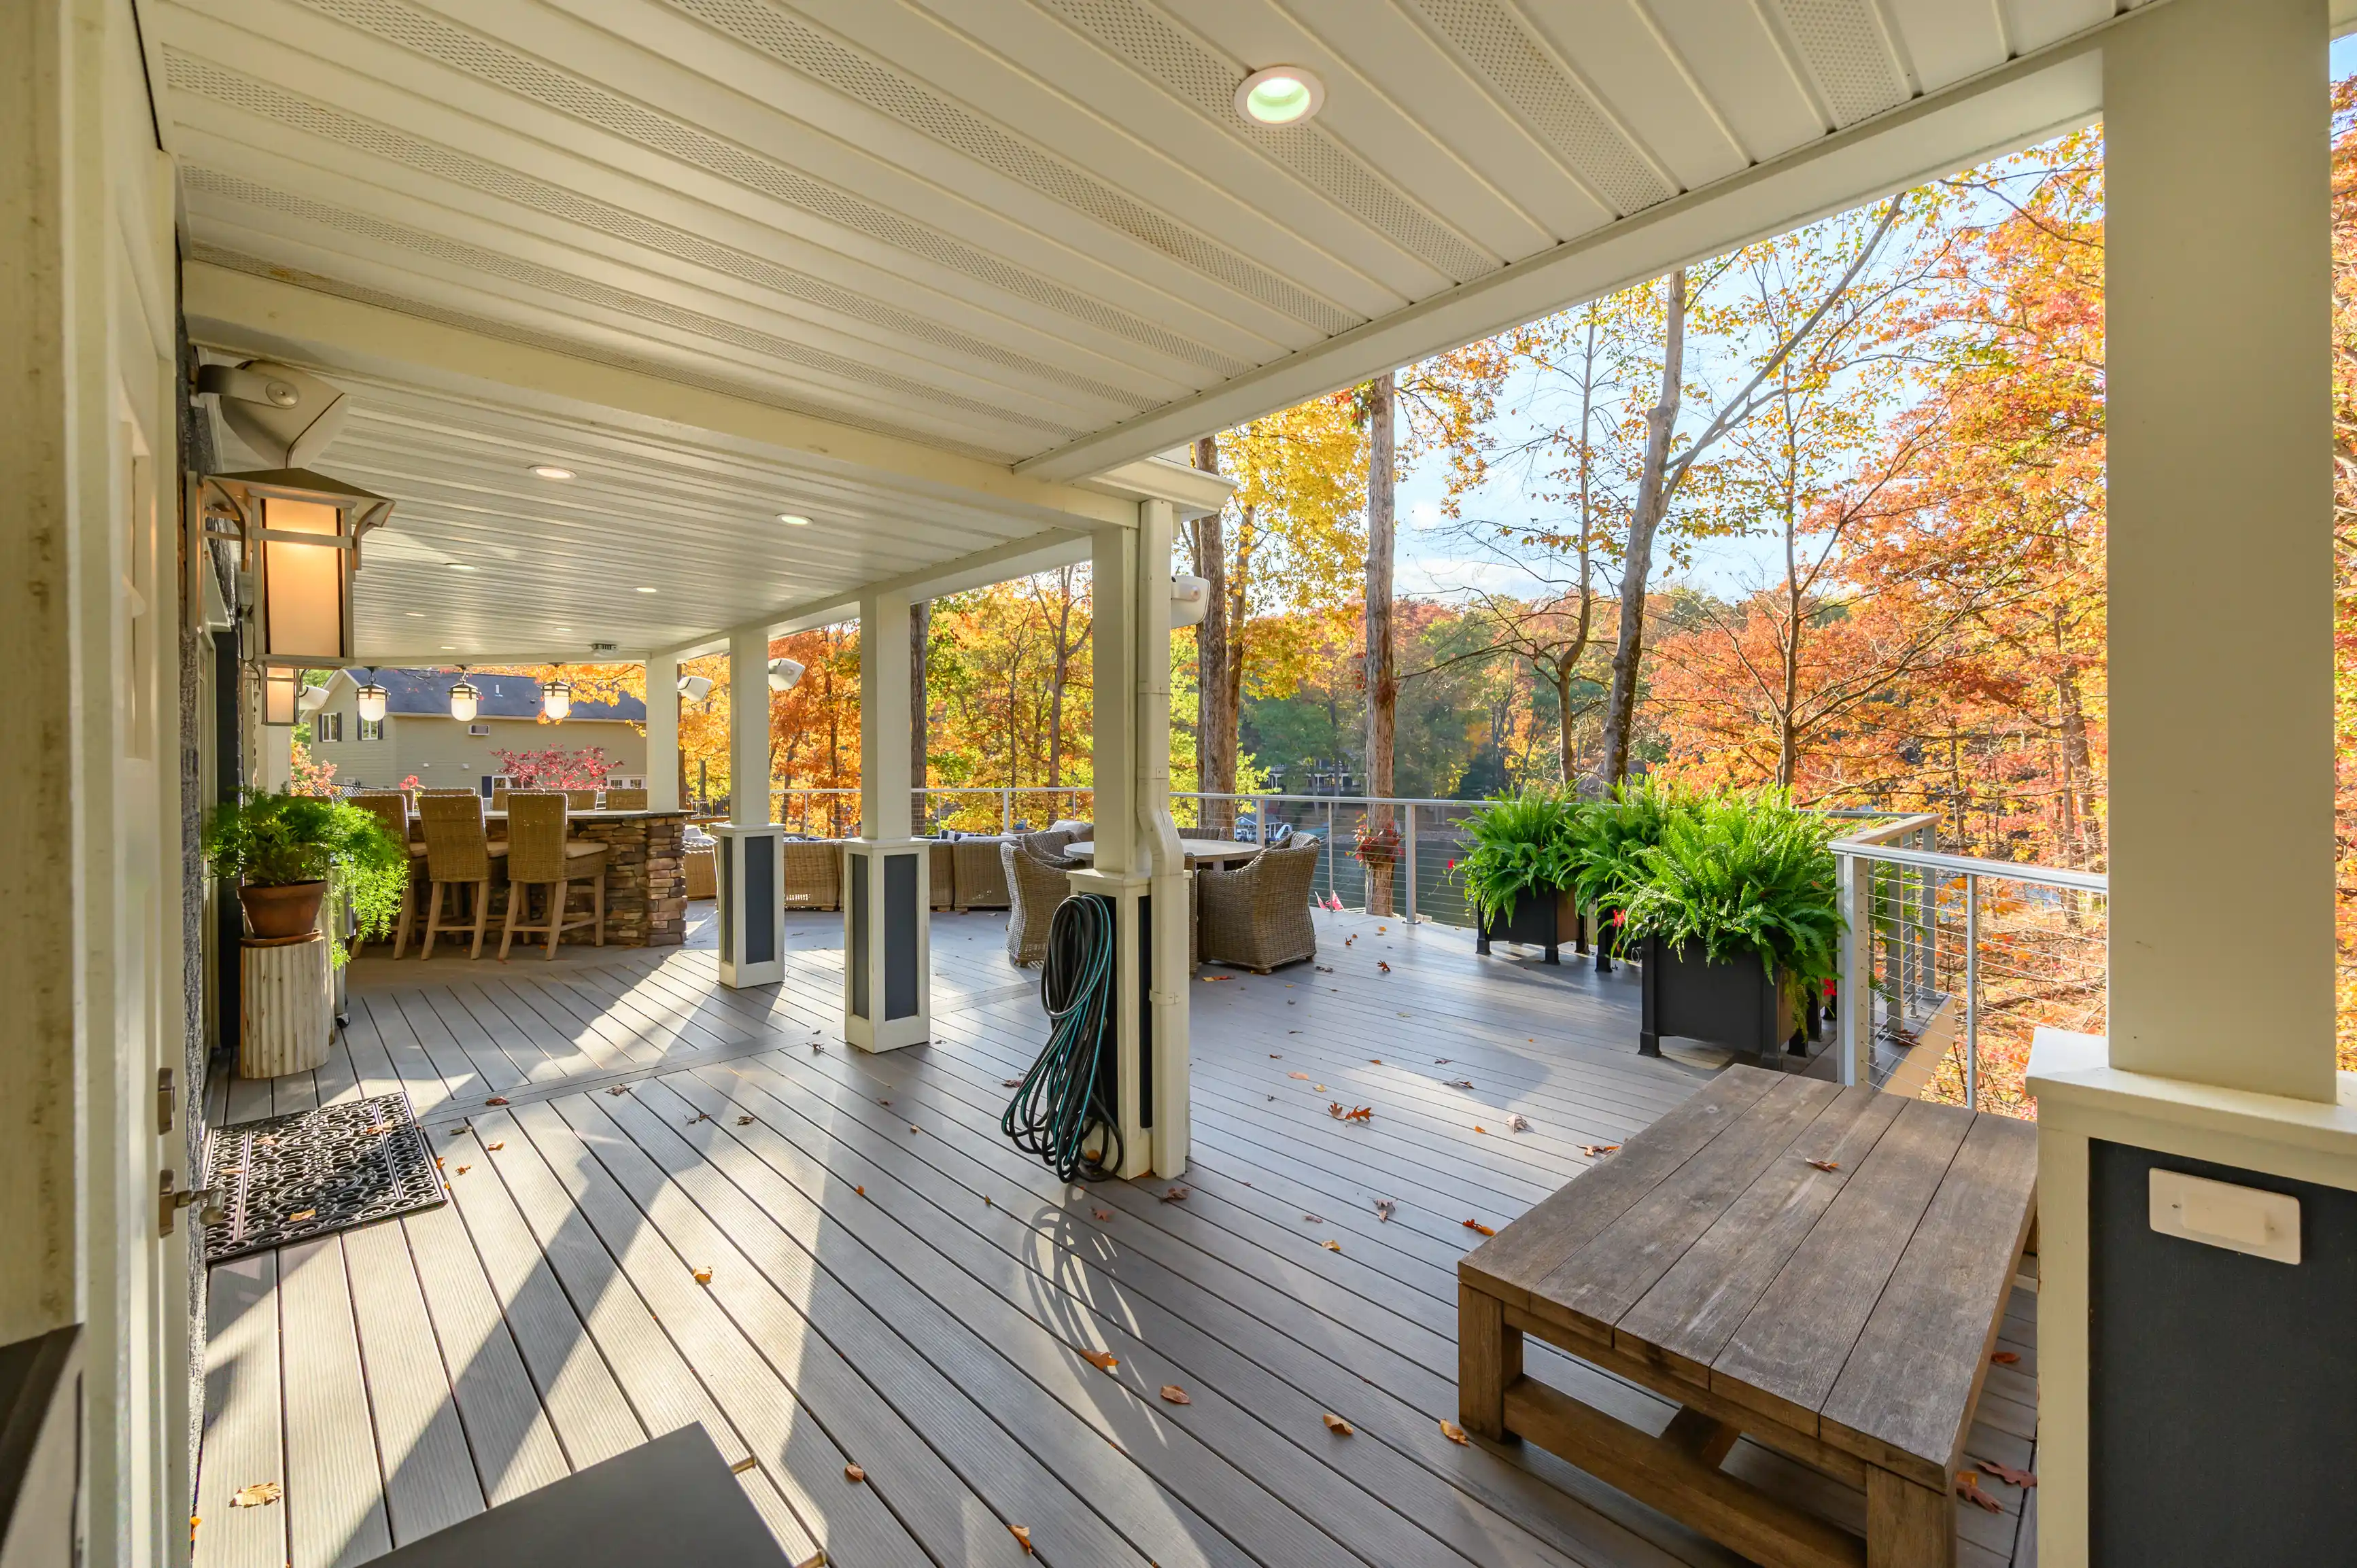 Spacious deck with outdoor seating surrounded by autumn foliage, featuring potted plants and a wooden bench under a covered area with a beadboard ceiling.